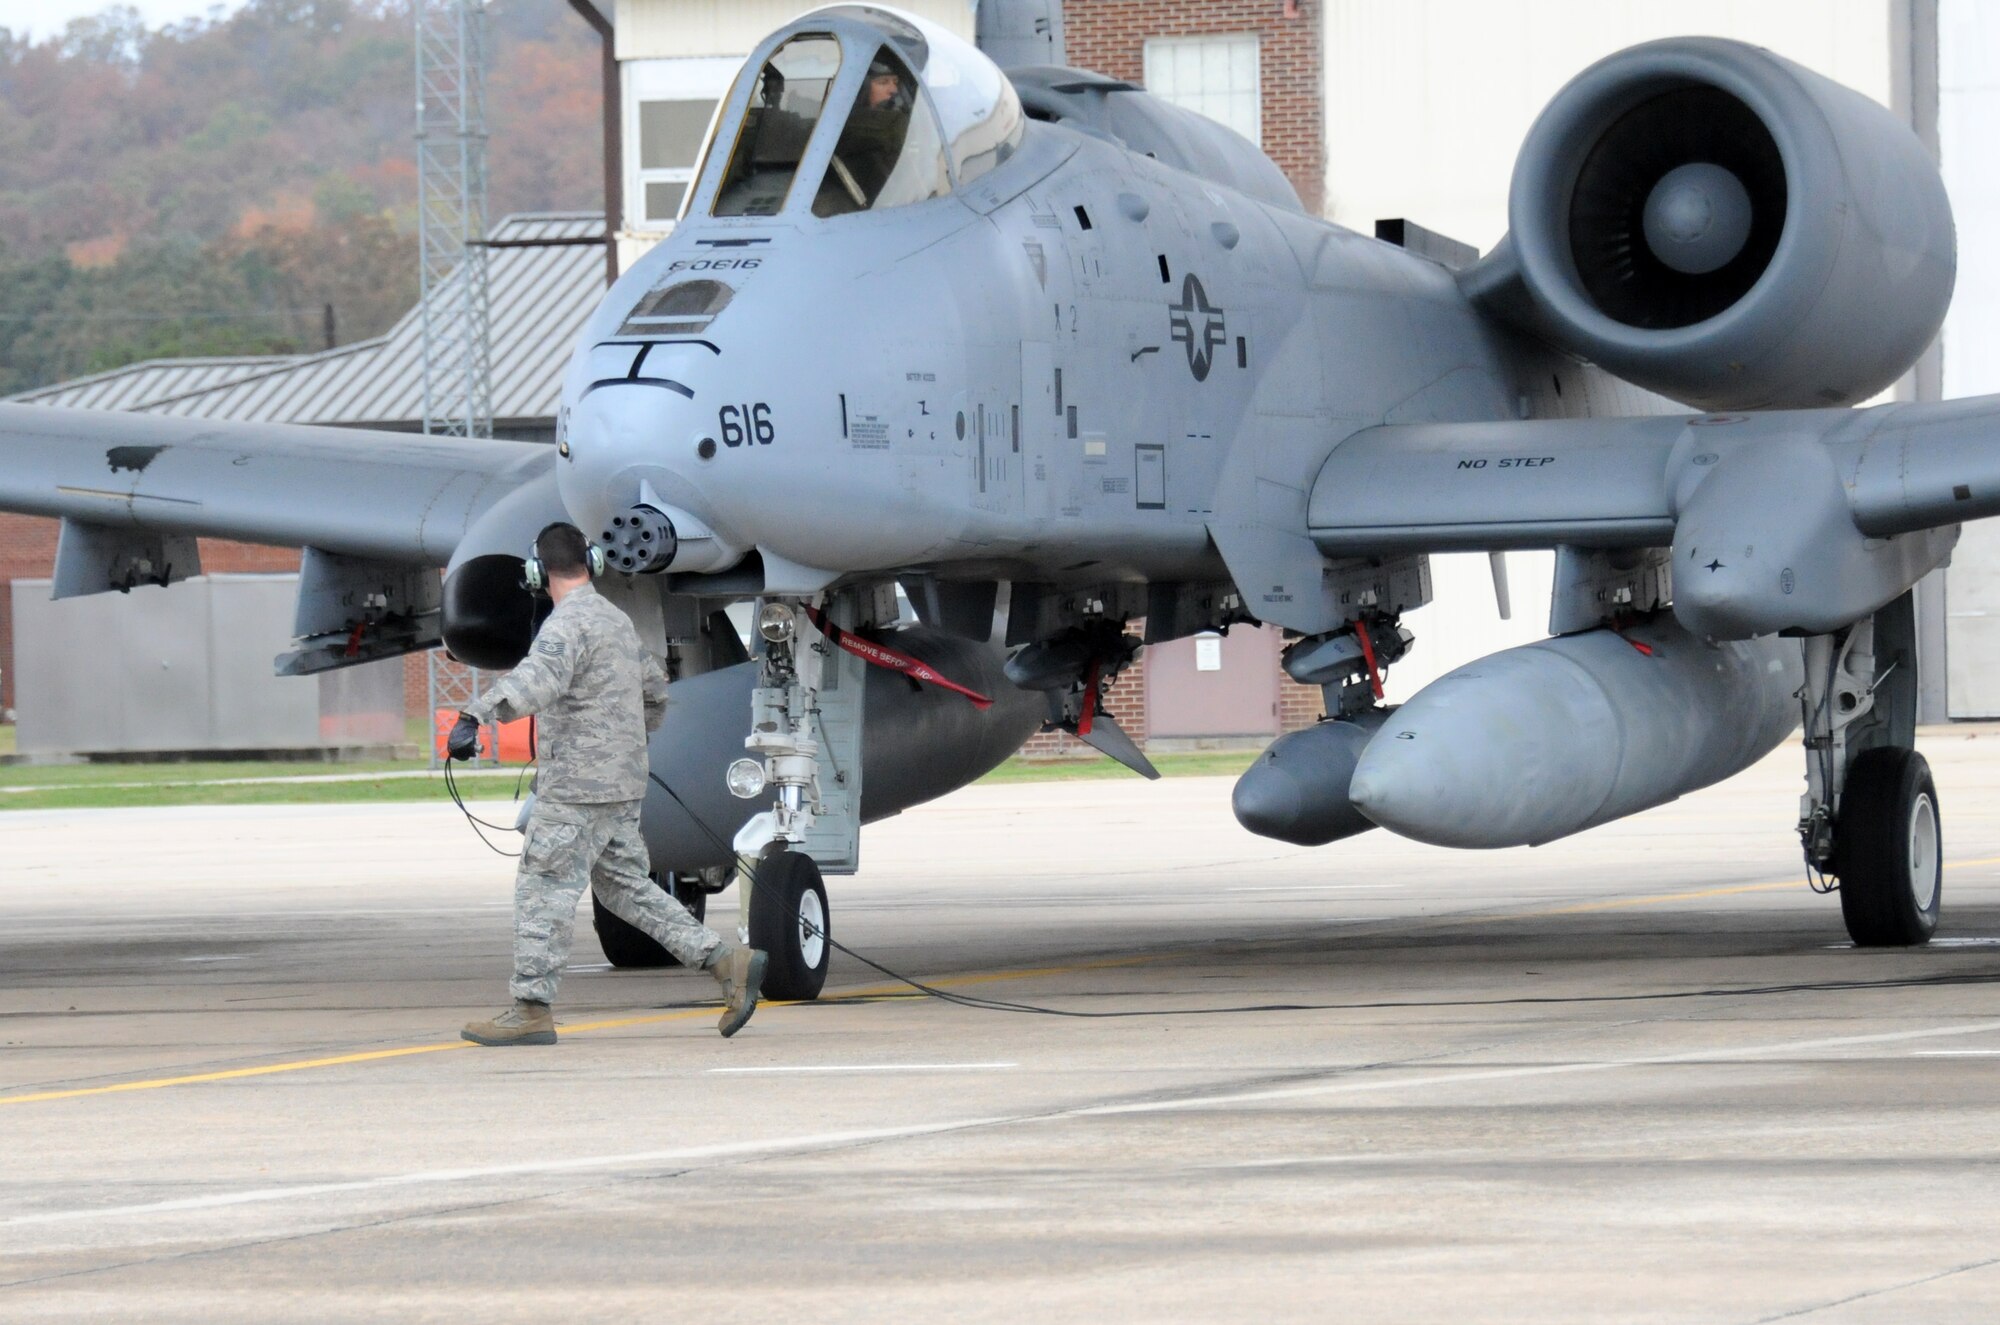 Another pair of A-10C Thunderbolt IIs roared off into the wild blue yonder Nov. 6 bound for Moody Air Force Base, Ga. Tail Nos. 0616 and 0642 departed the 188th Fighter Wing's Ebbing Air National Guard Base as part of the wing’s on-going conversion from a fighter mission to remotely piloted aircraft and Intelligence mission, which will include a space-focused targeting squadron. (U.S. Air National Guard photo by Tech Sgt. Josh Lewis/188th Fighter Wing Public Affairs)